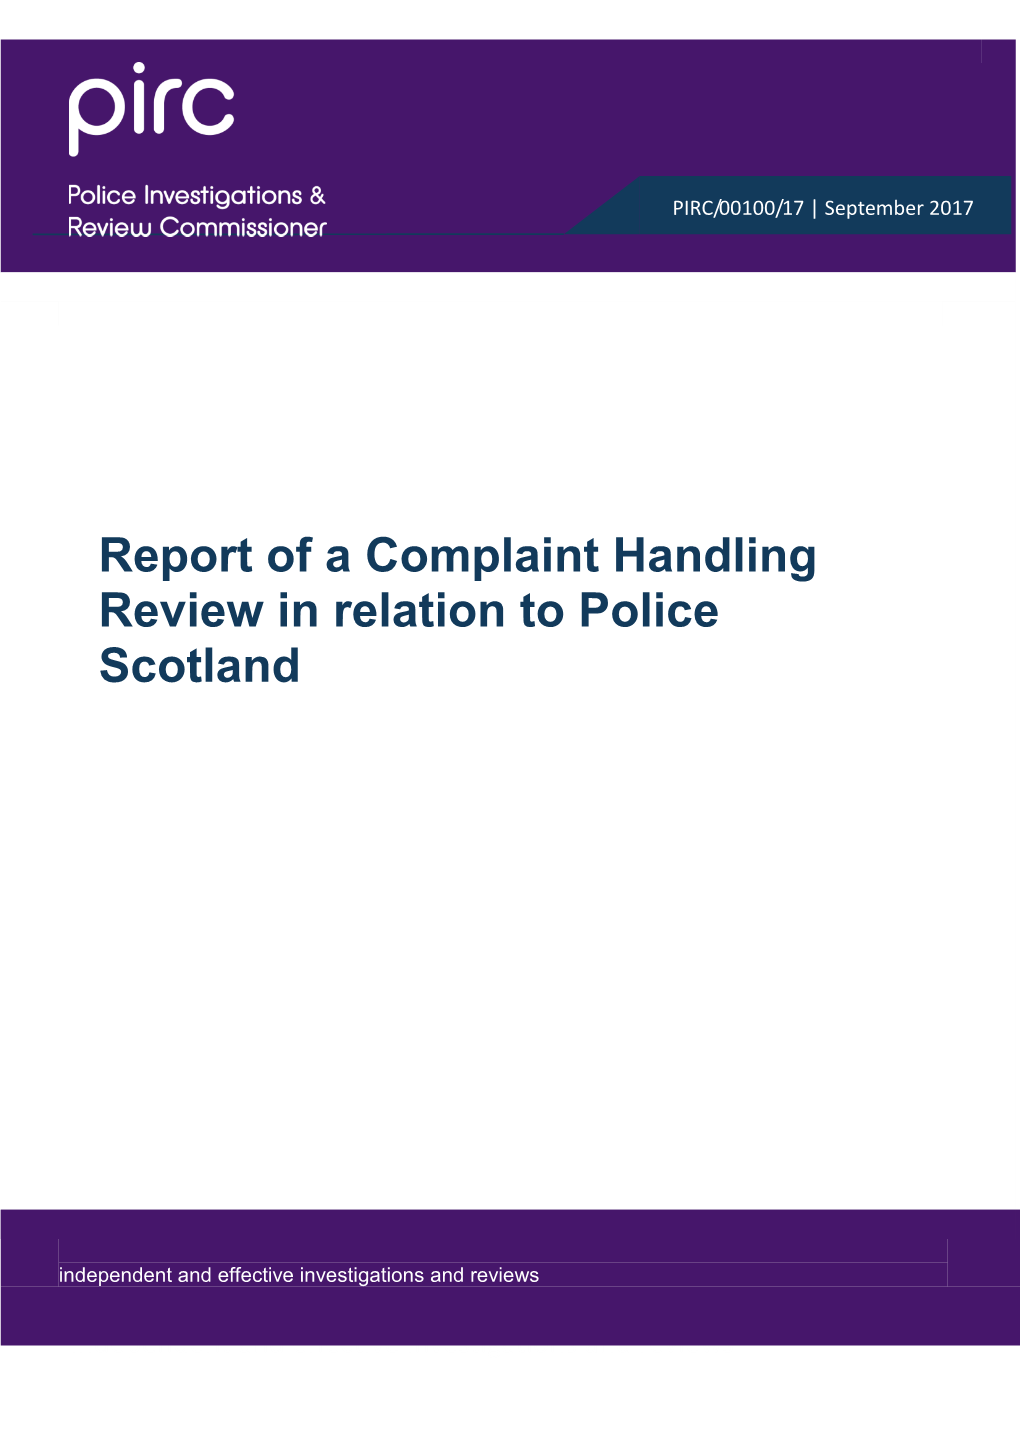 Report of a Complaint Handling Review in Relation to Police Scotland